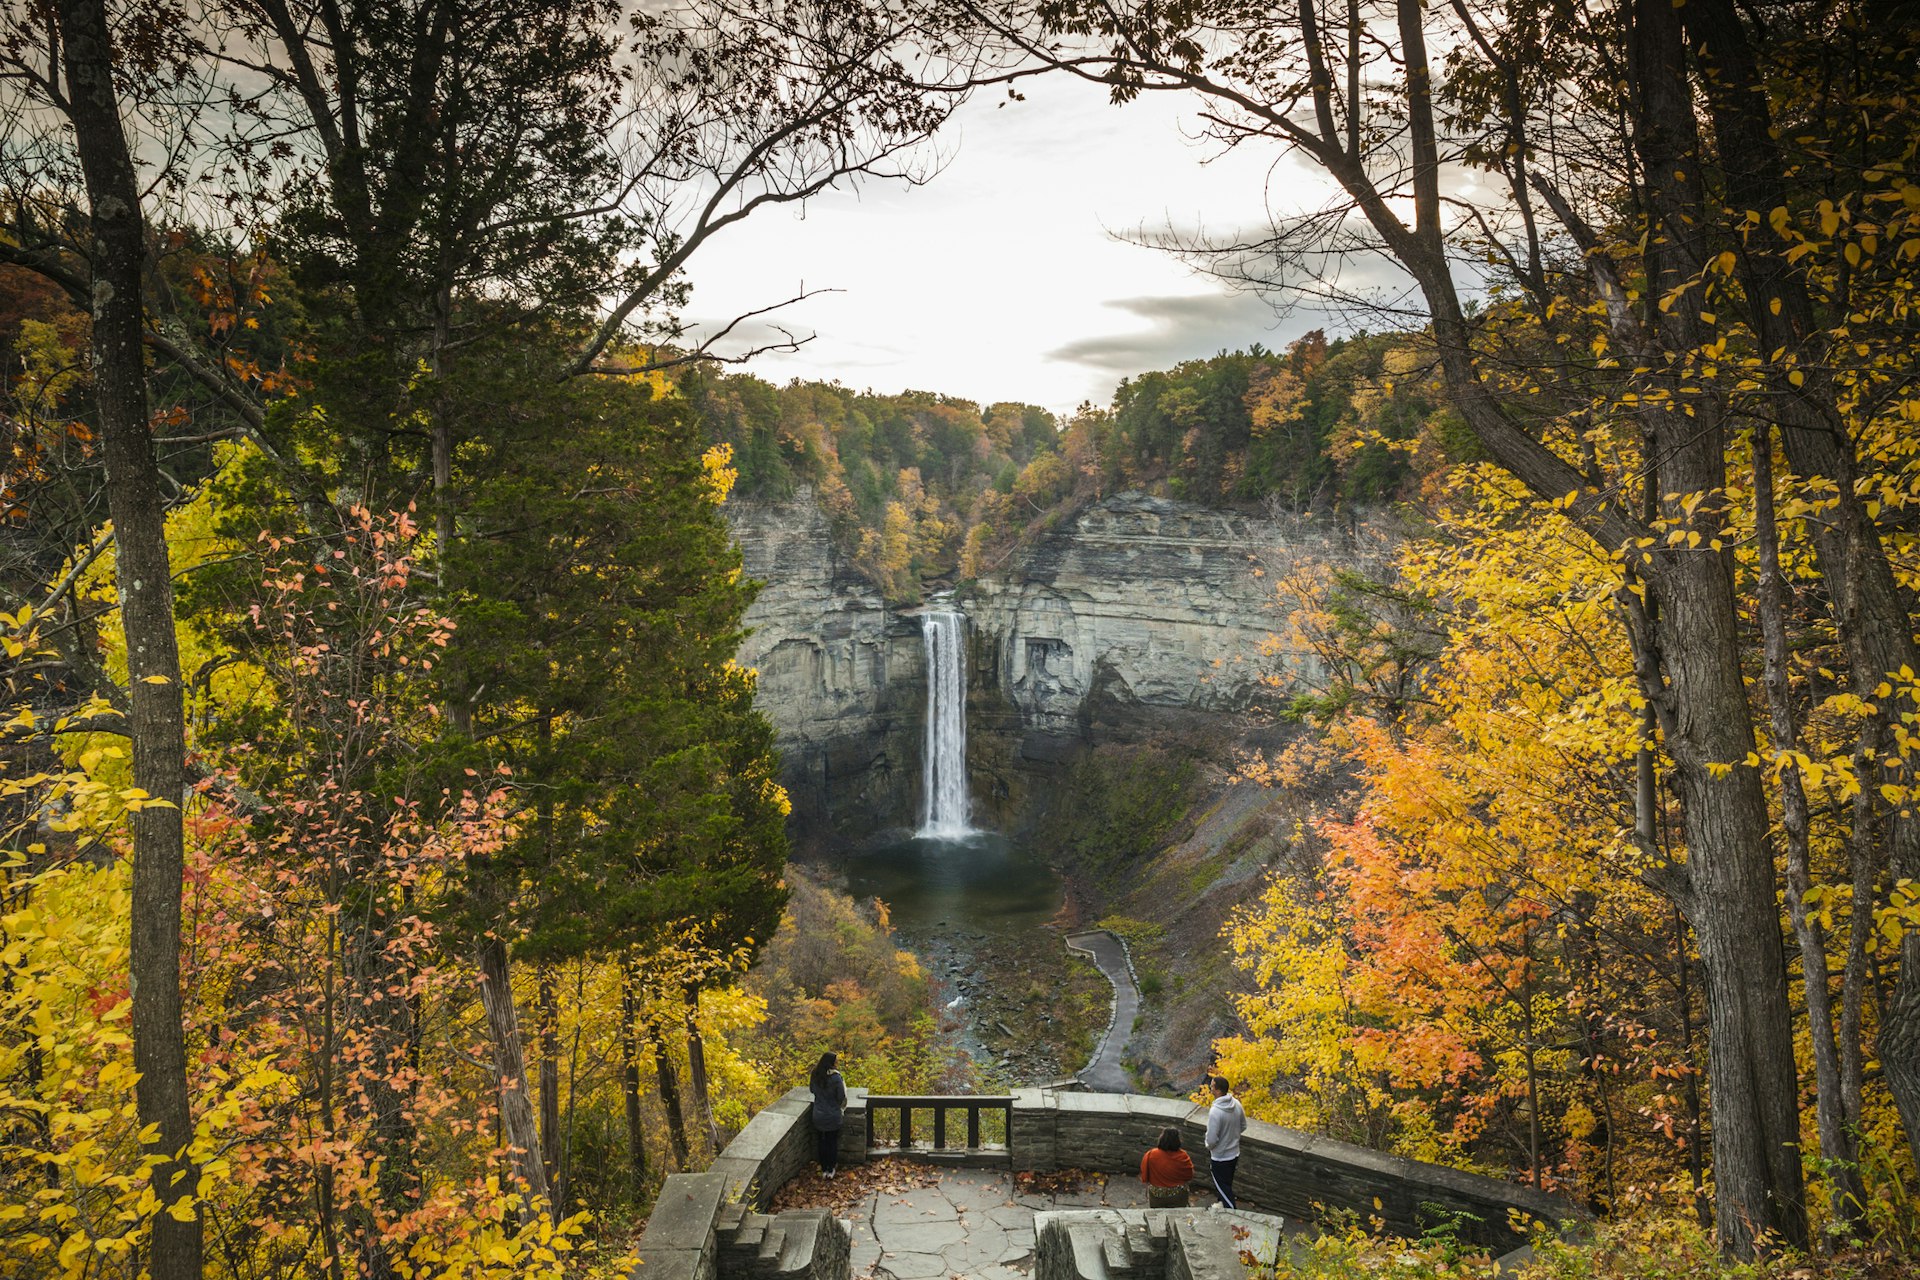 A view of Taughannock Falls waterfall surrounded by trees in fall